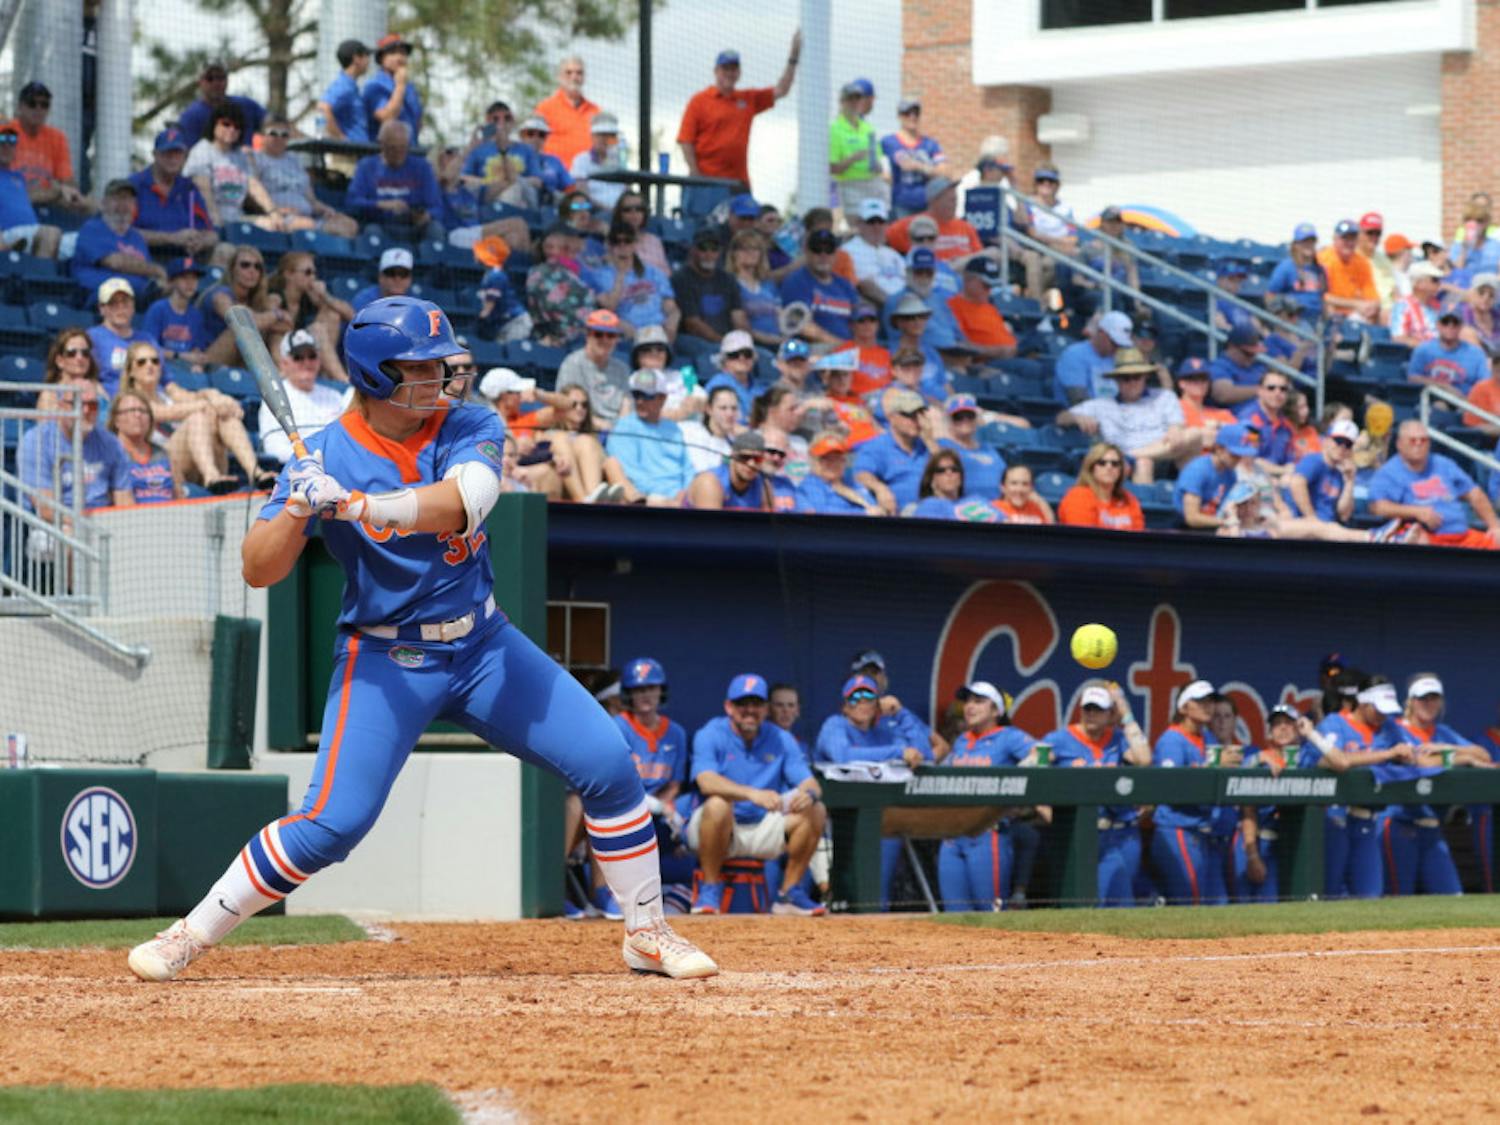 UF catcher Kendyl Lindaman had four home runs and nine RBIs over the weekend in two games against Mercer.
&nbsp;